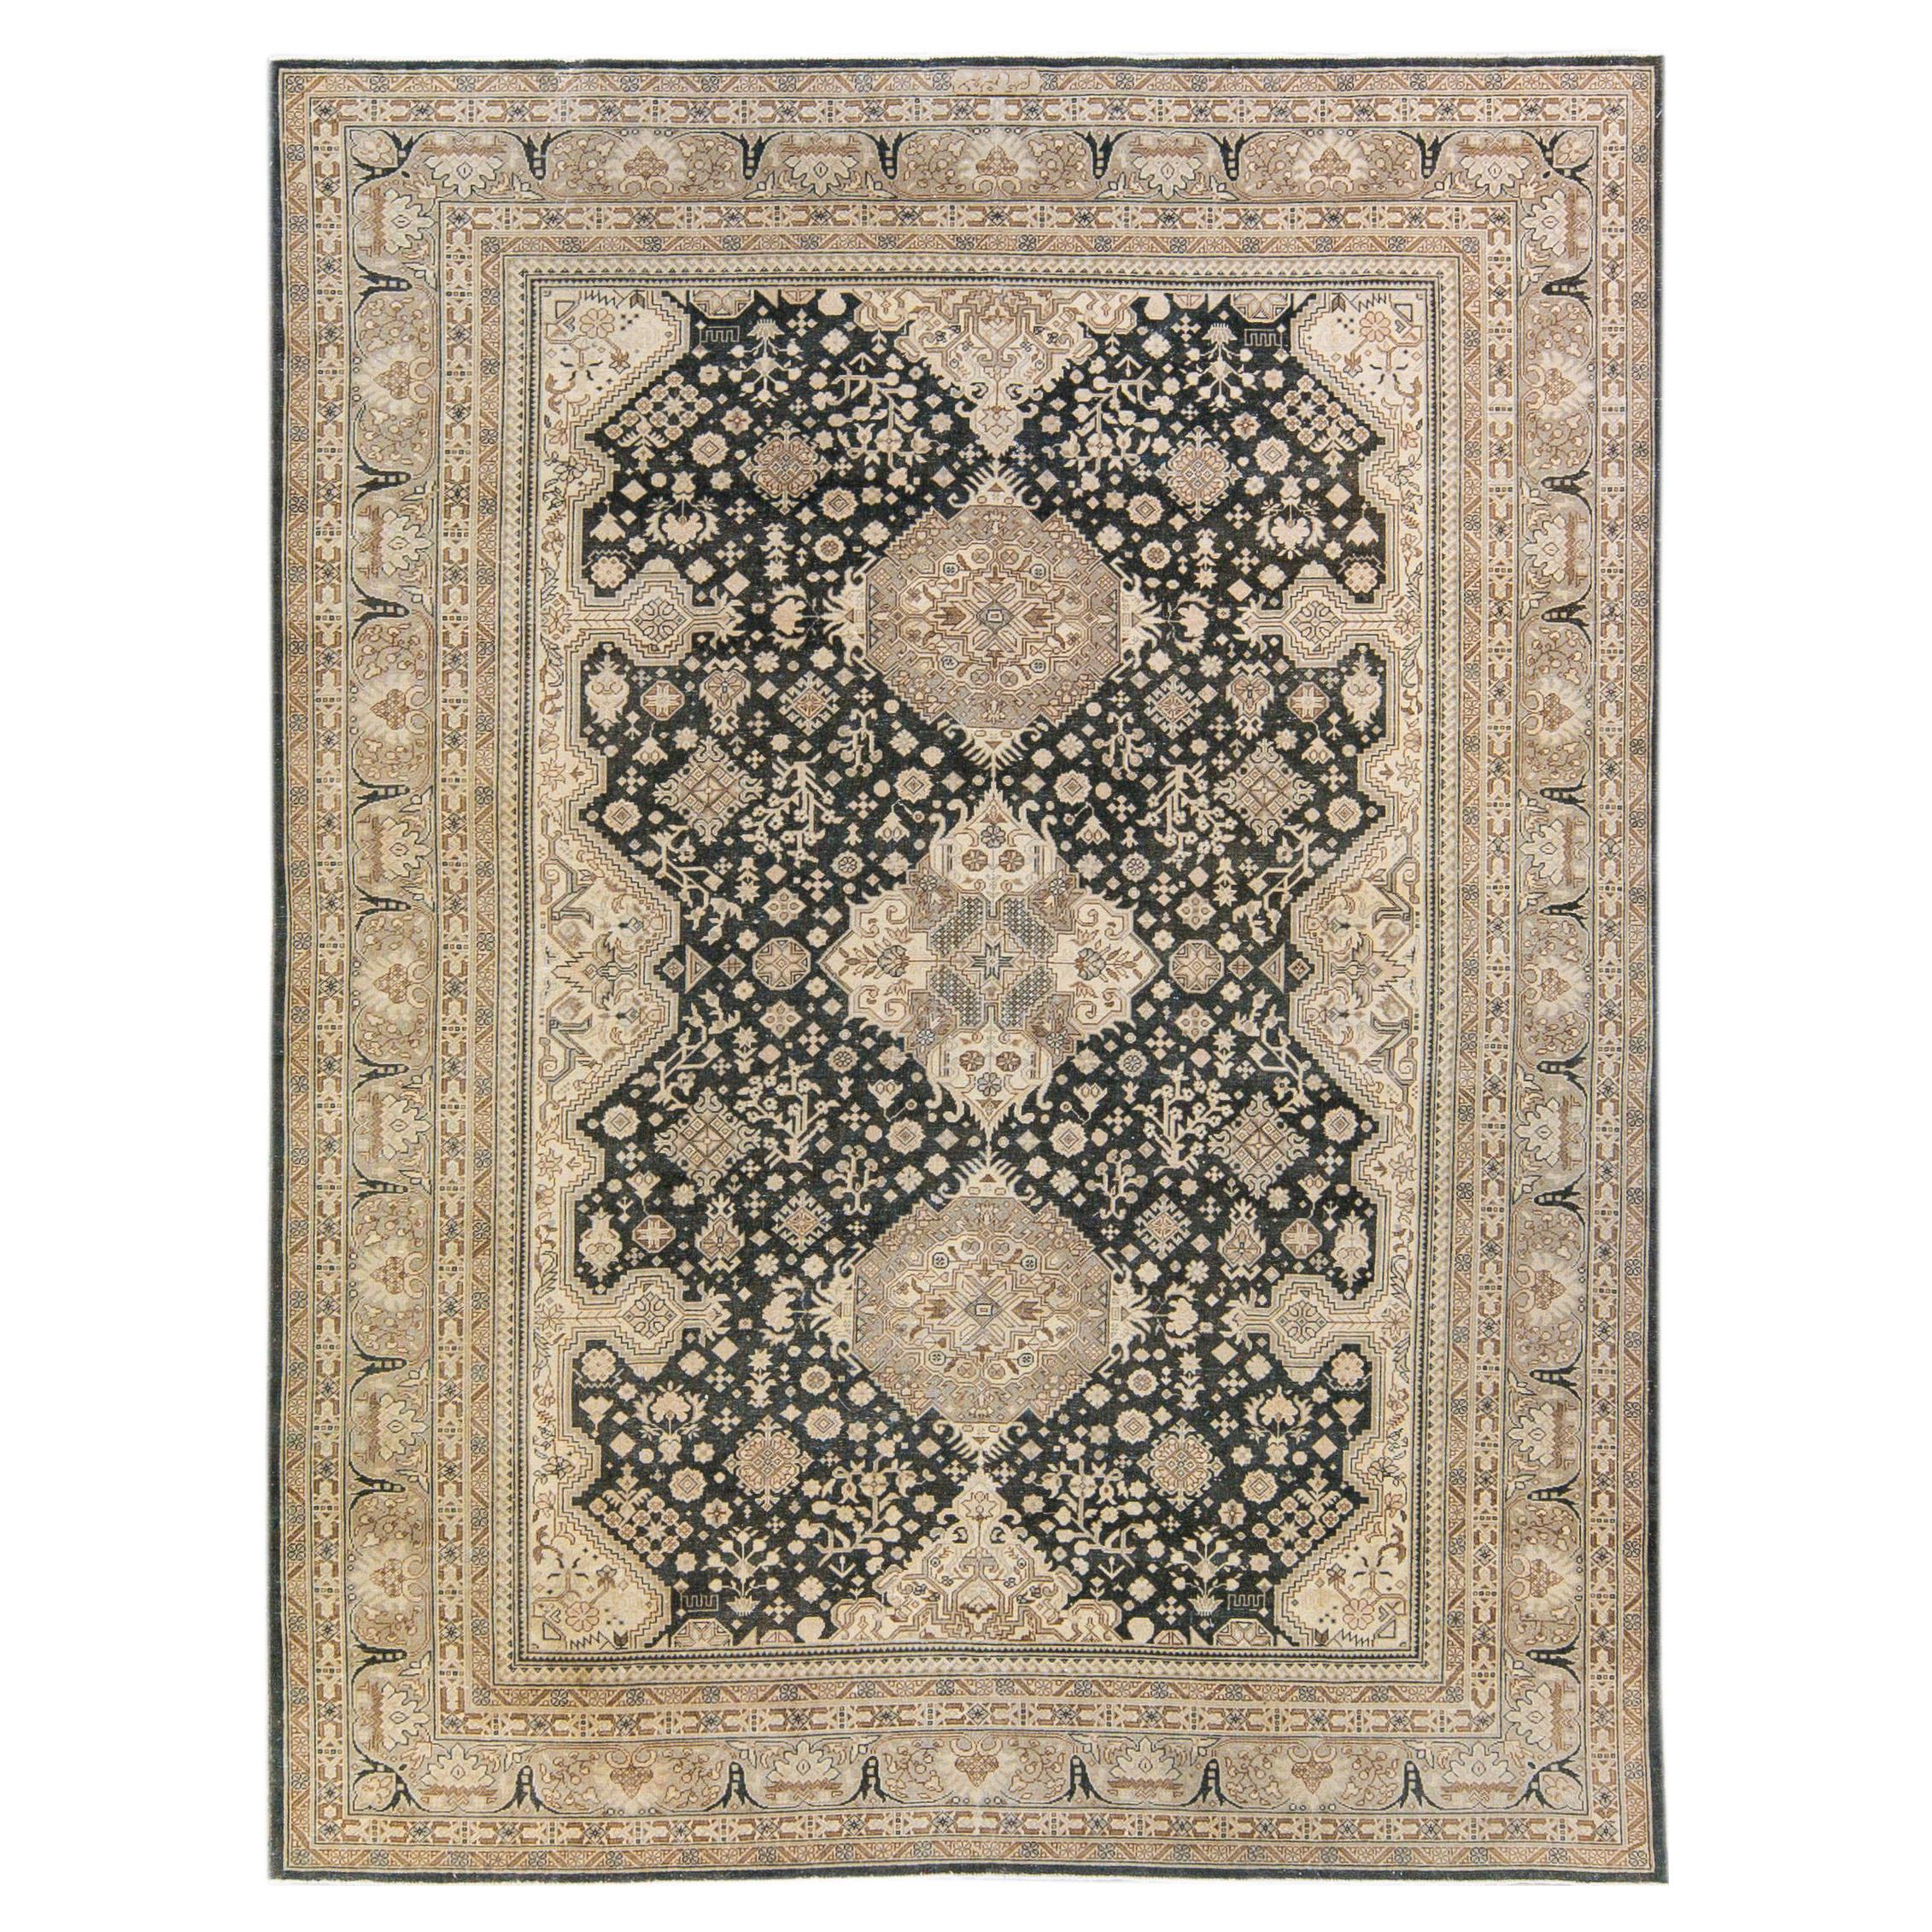 Antique Tabriz Persian Handmade Tribal Medallion Gray and Beige Wool Rug For Sale